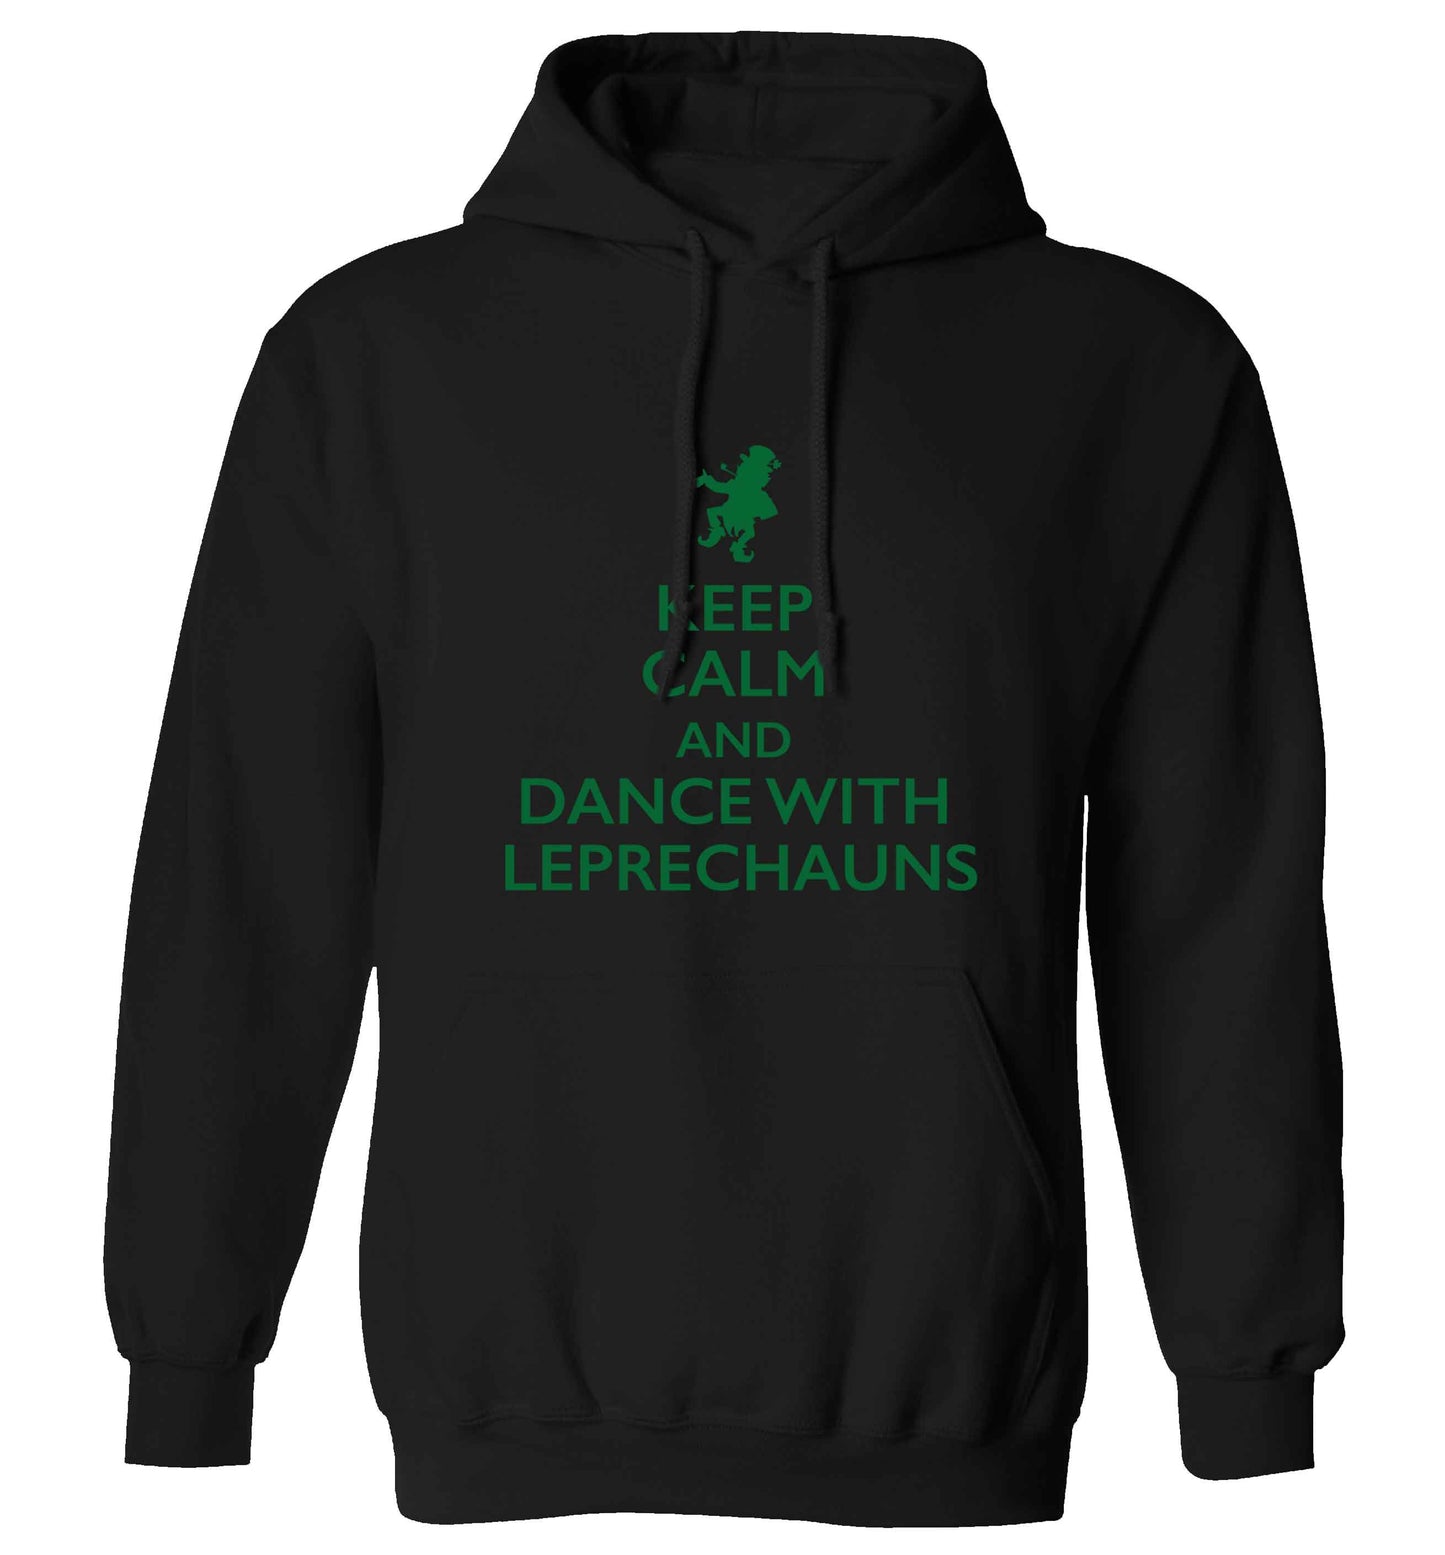 Keep calm and dance with leprechauns adults unisex black hoodie 2XL